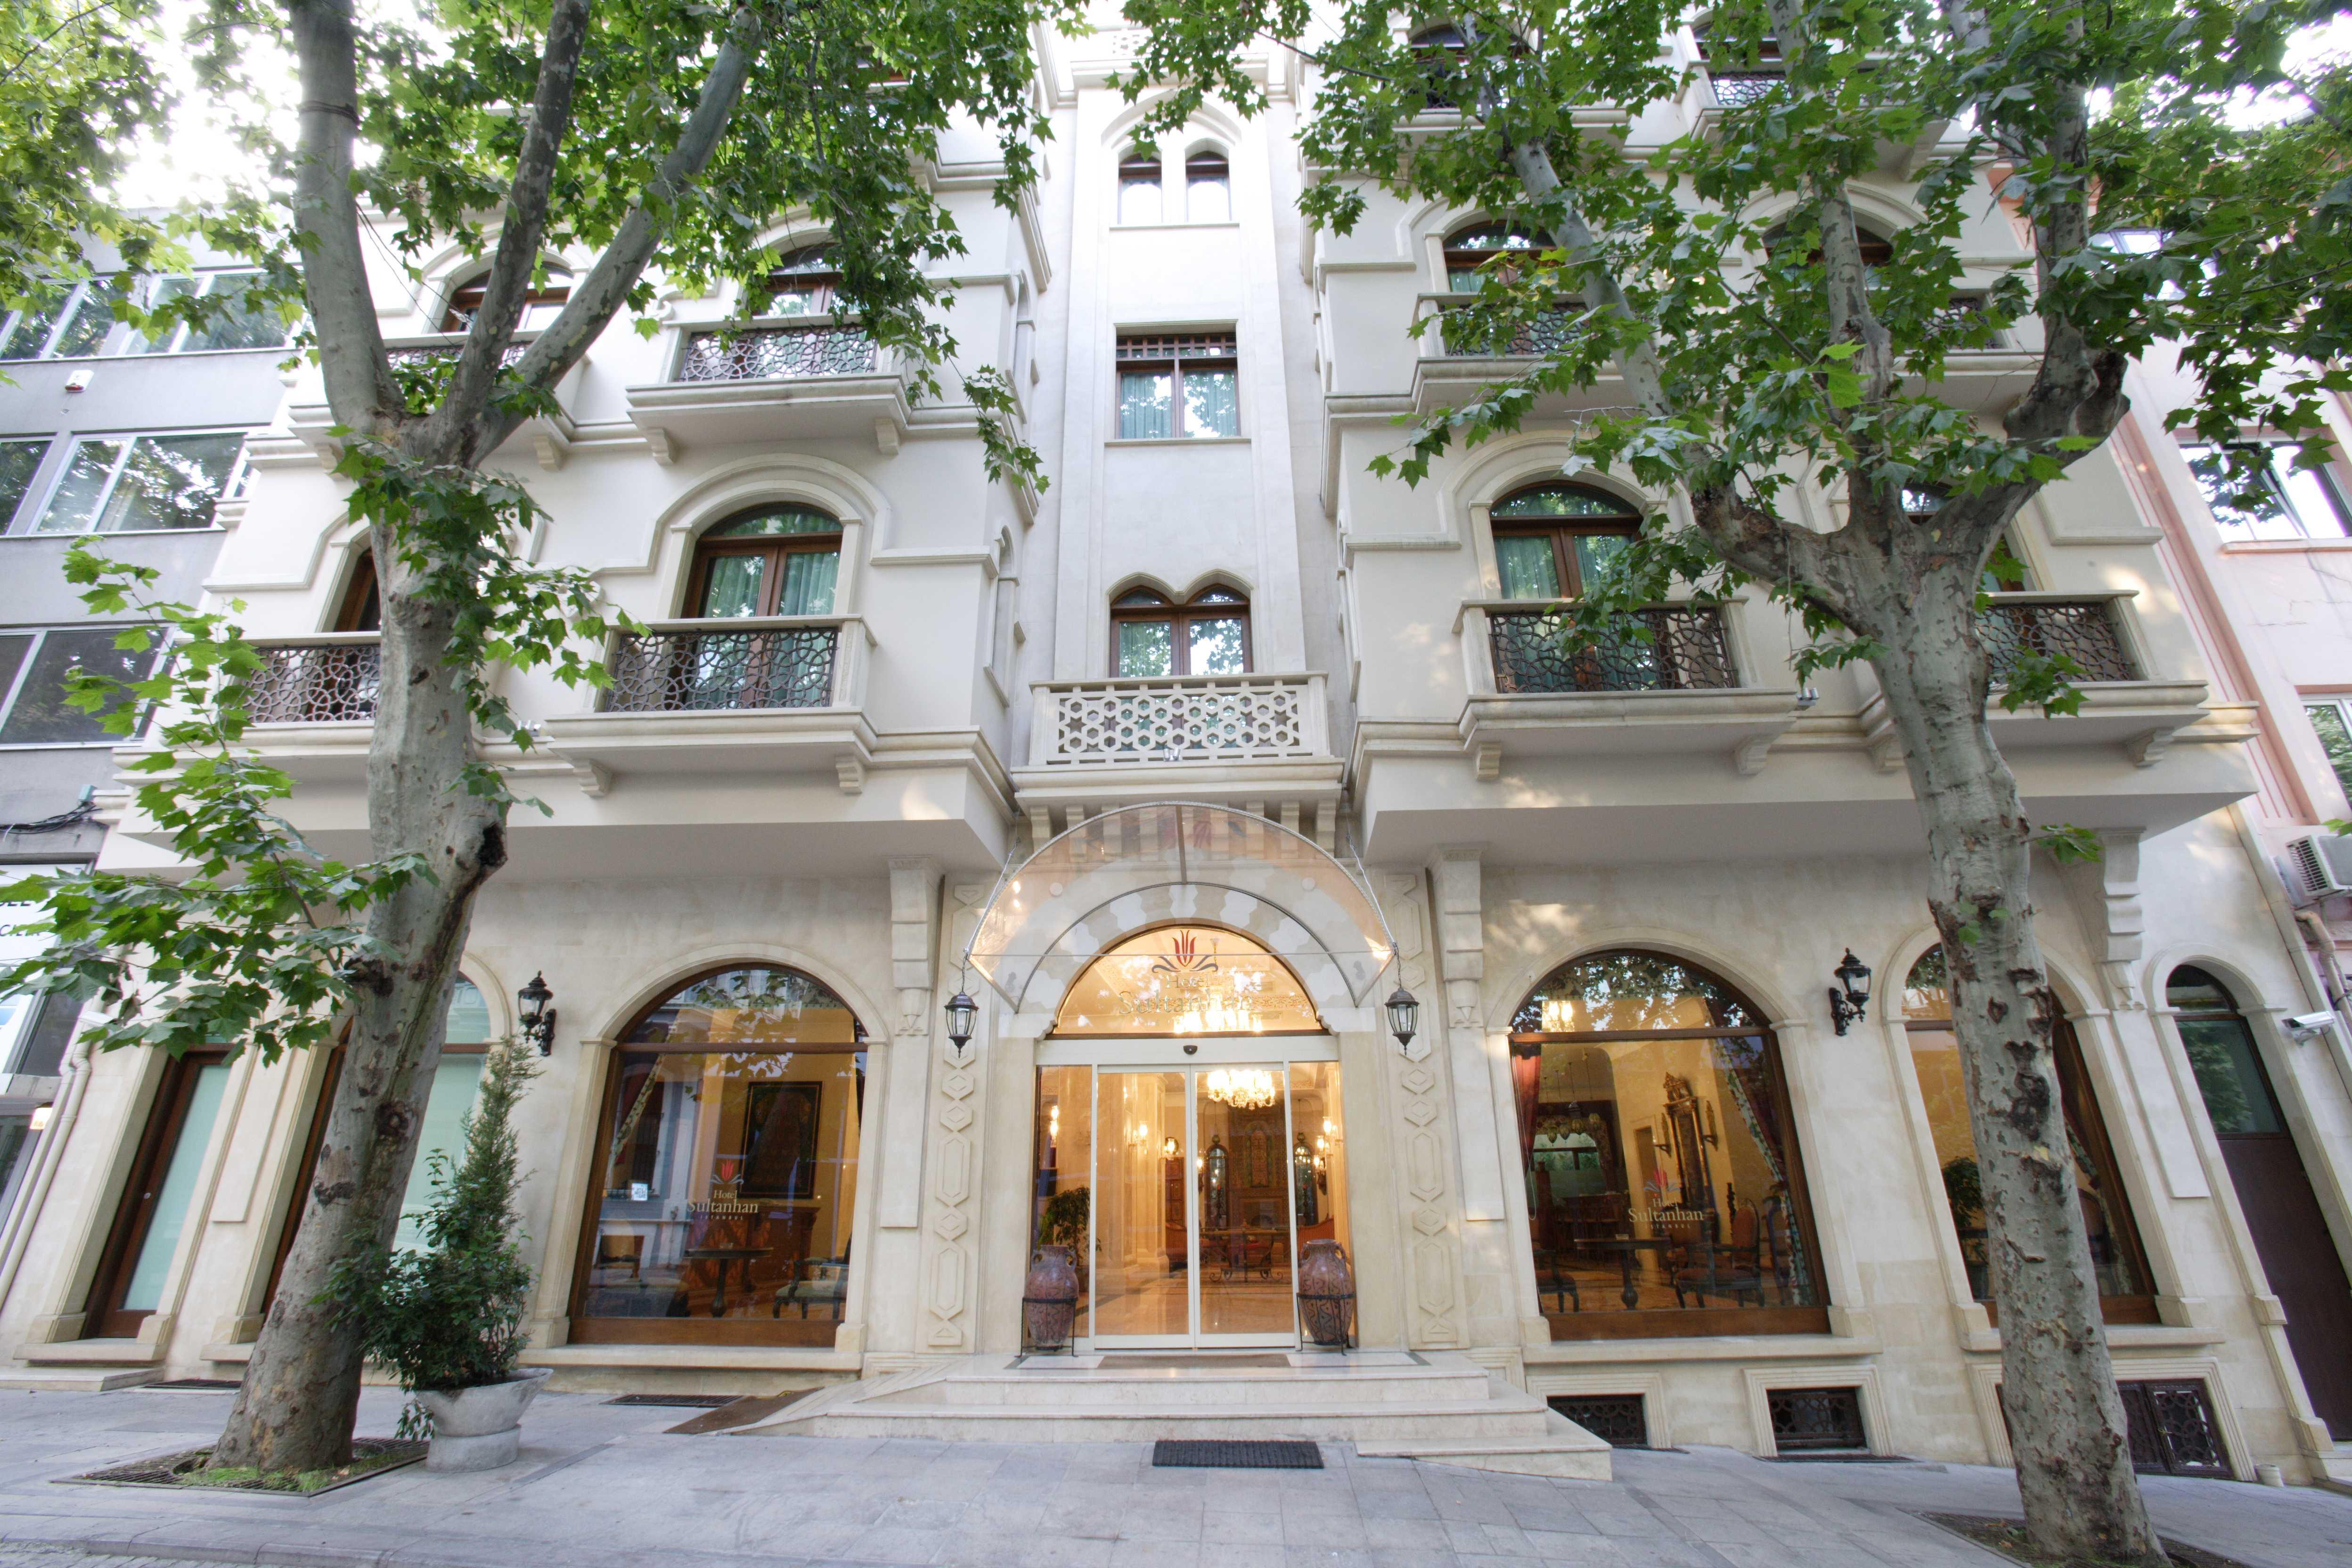 Hotel Sultanhan - Special Category Istambul Exterior foto